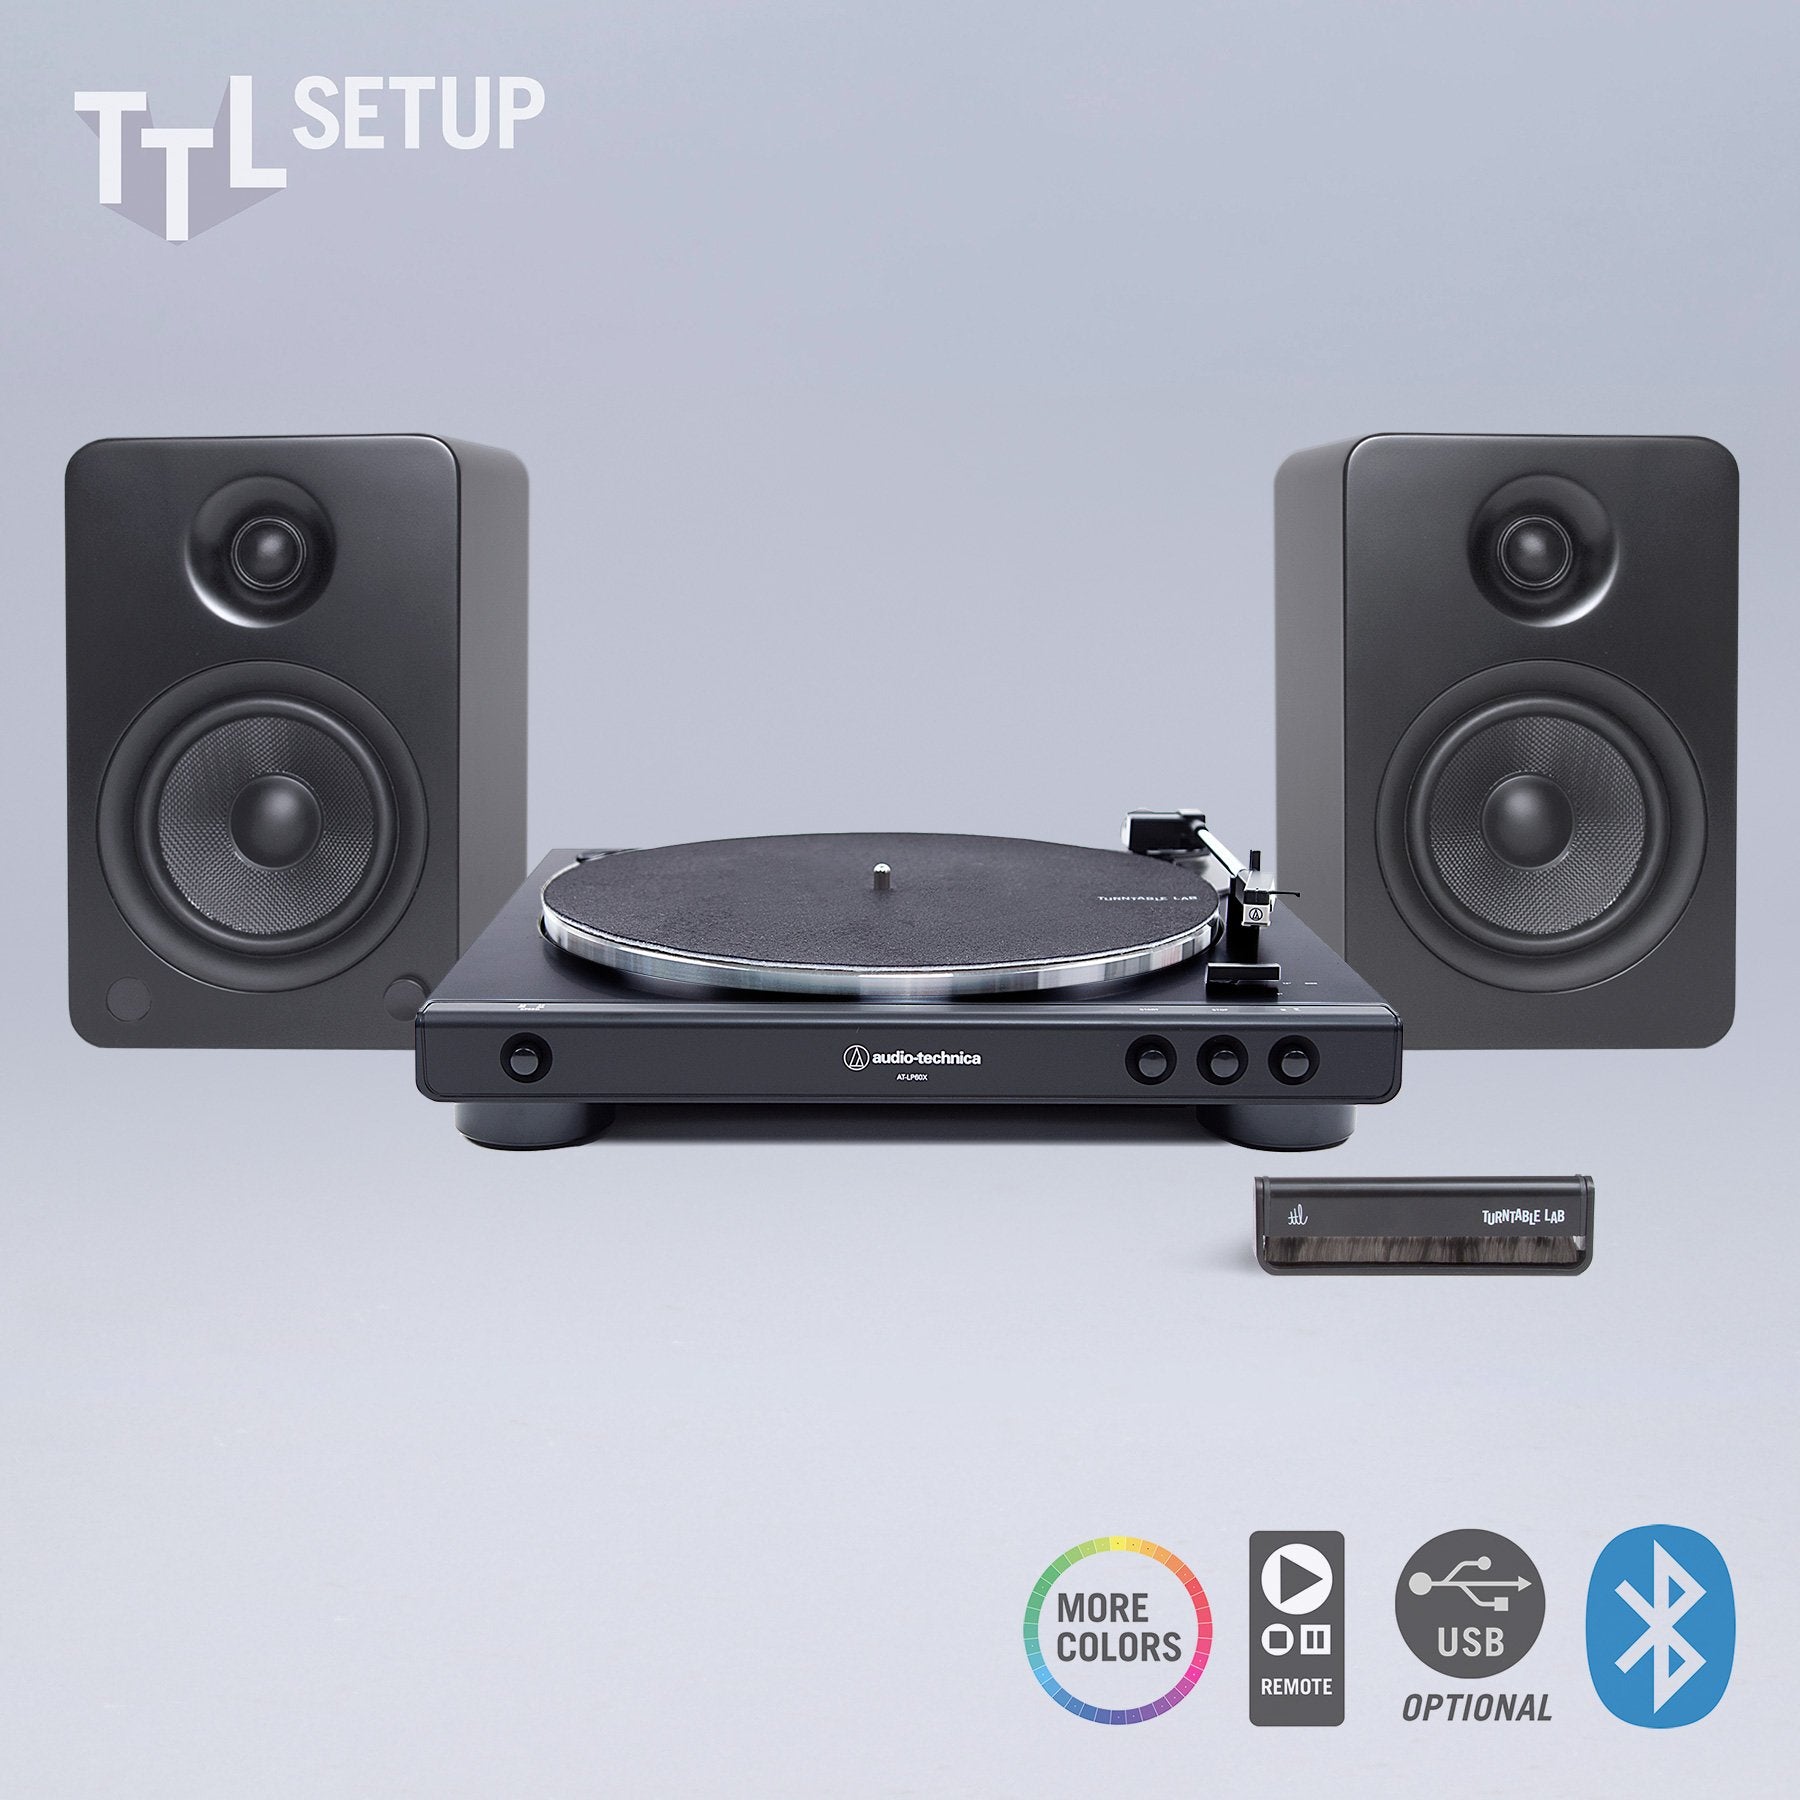 Audio-Technica: AT-LP60X / Kanto YU6 / Turntable Package